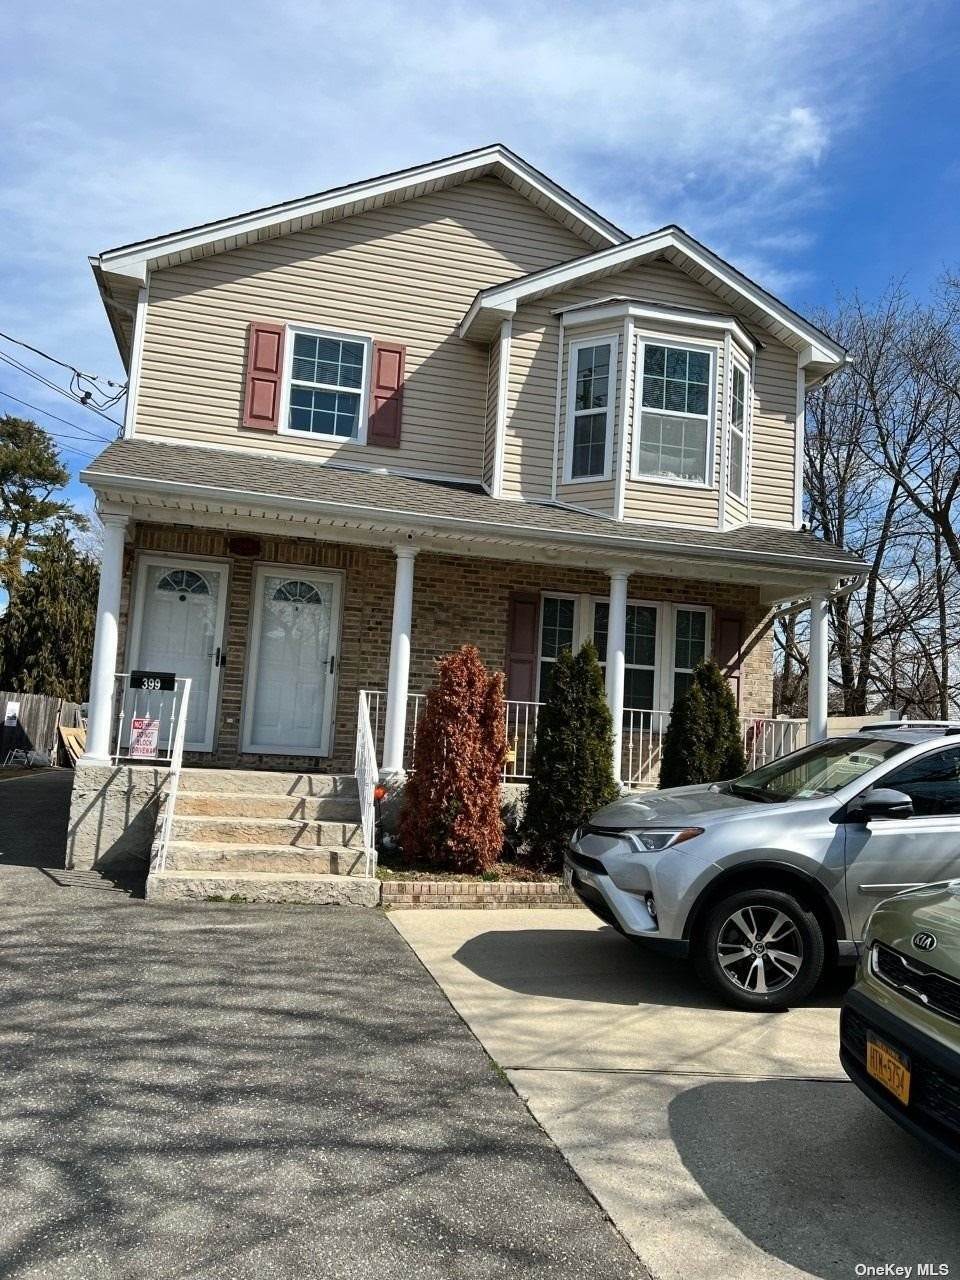 Residential Lease at 399 Merrick Avenue East Meadow, New York 11554 United States